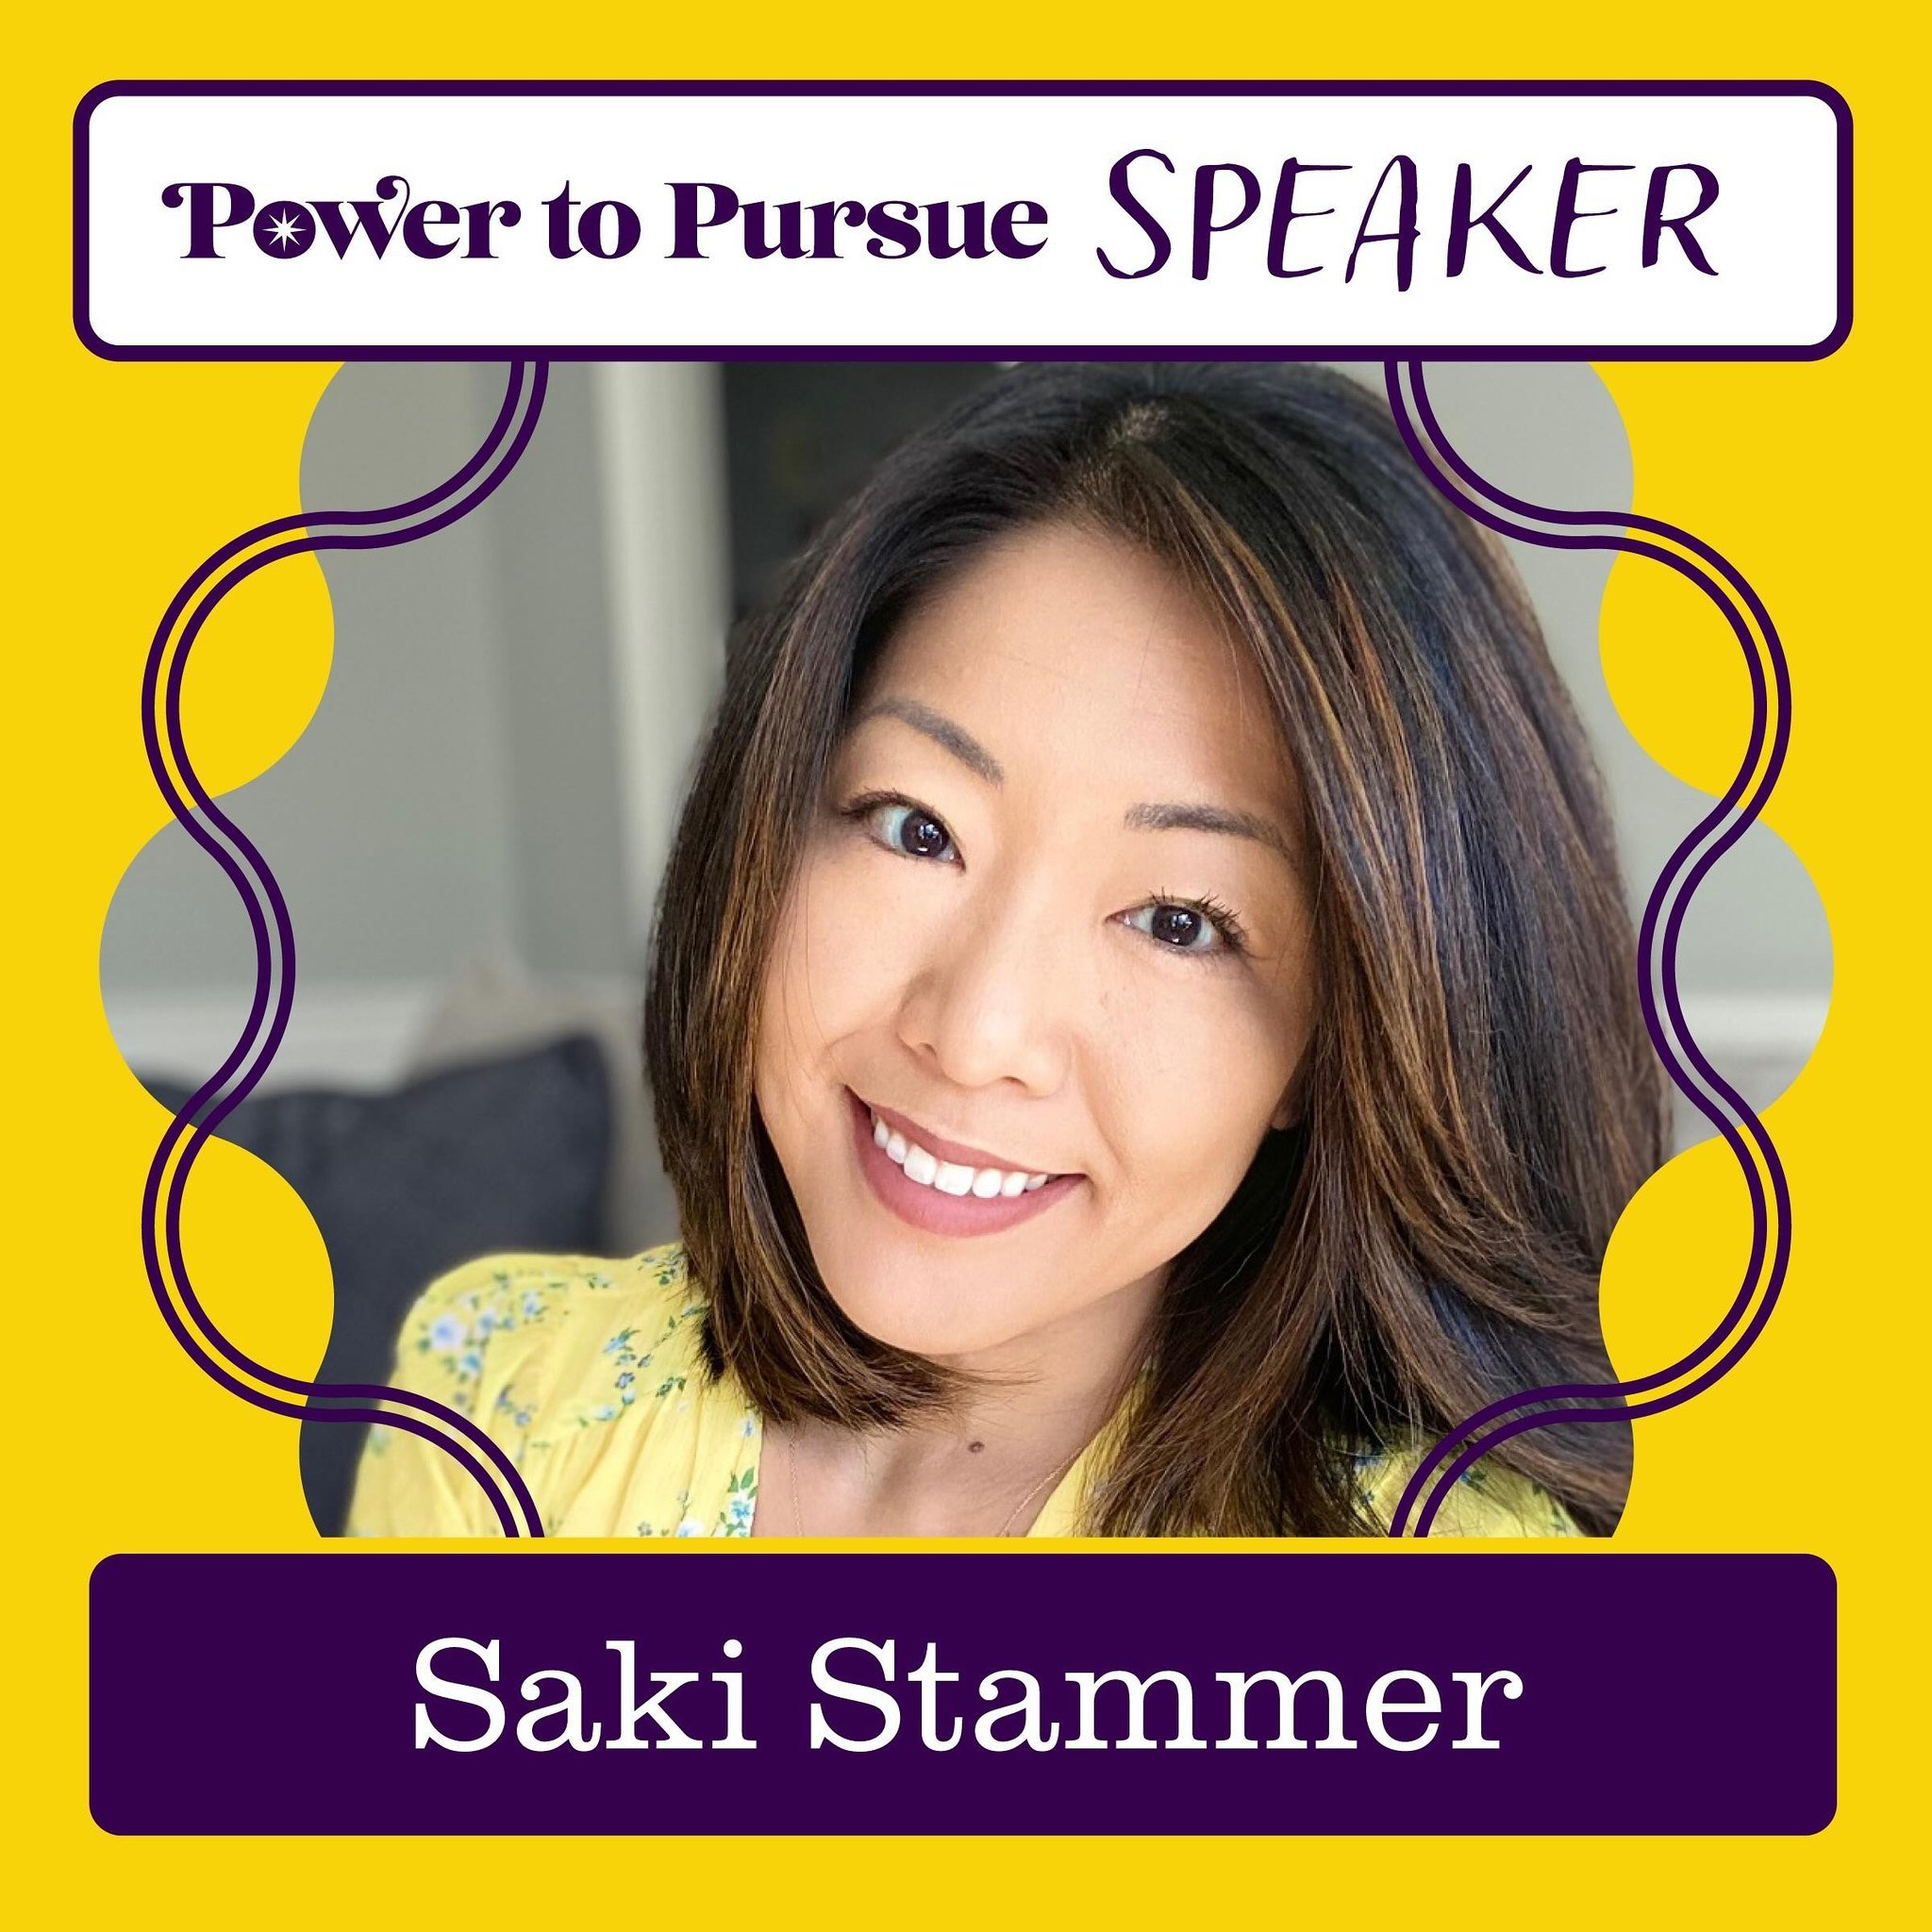 We&rsquo;re pleased to share the community submission breakout session for this year! Introducing The Beauty of Continuous Improvement: Kaizen Your Life by Saki Stammer!

&ldquo;Kaizen&rdquo; is a Japanese word meaning &ldquo;continuous improvement.&